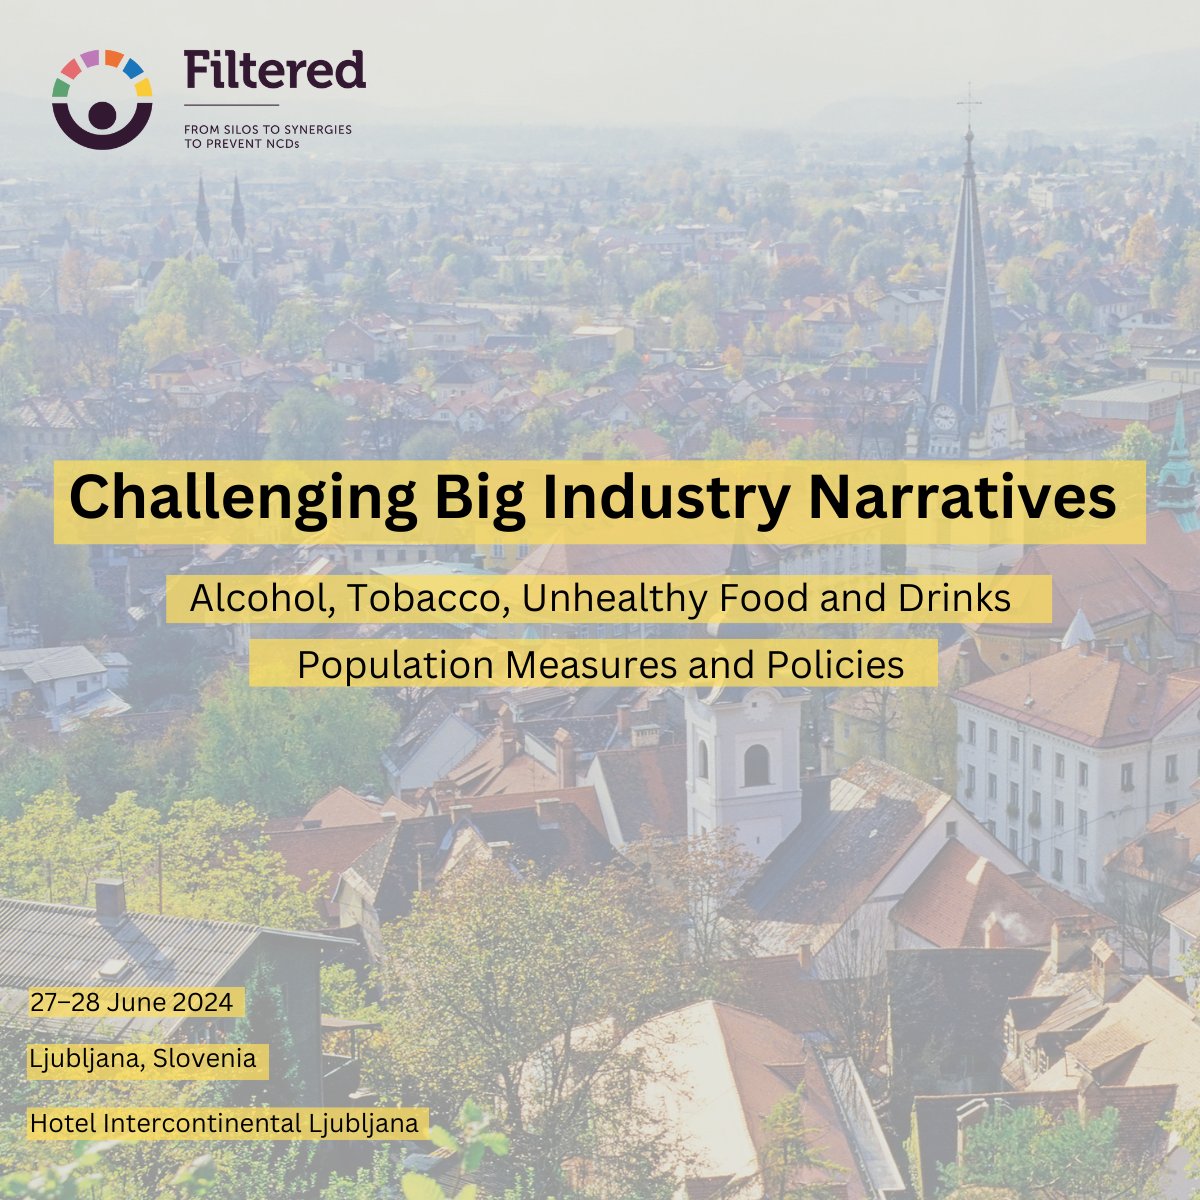 📣 Conference Announcement! Join us on 27-28 June in Ljubljana, Slovenia 🇸🇮 at the conference “Challenging Big Industry Narratives: Alcohol, Tobacco, Unhealthy Food and Drinks: Population Measures and Policies”. We hope to see you there! Register here 👉 bit.ly/3W91Ty4